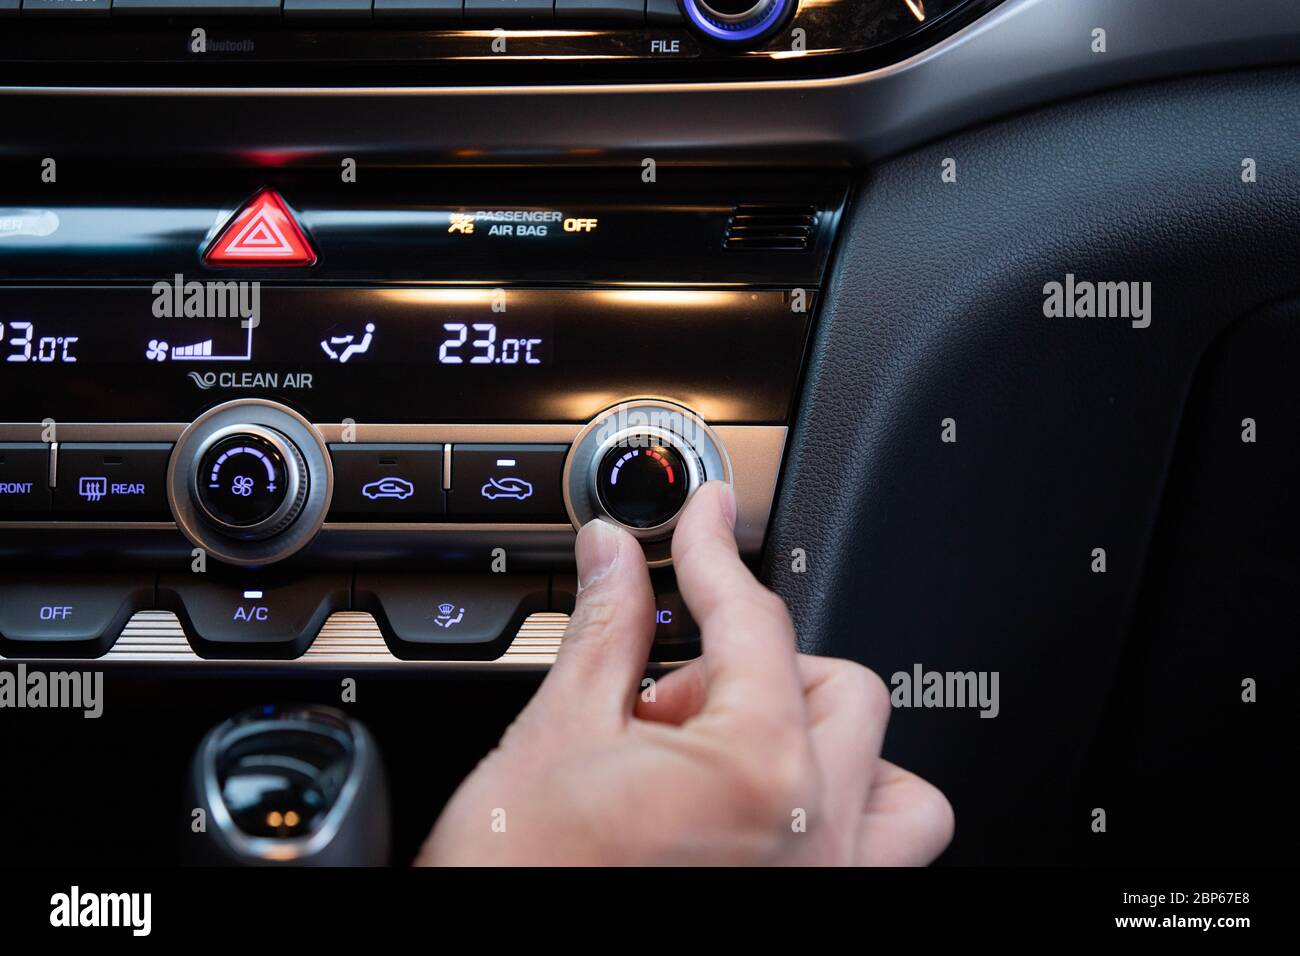 Hand turning on car's air conditioner dial. Hand adjusting heater temperature button. Stock Photo